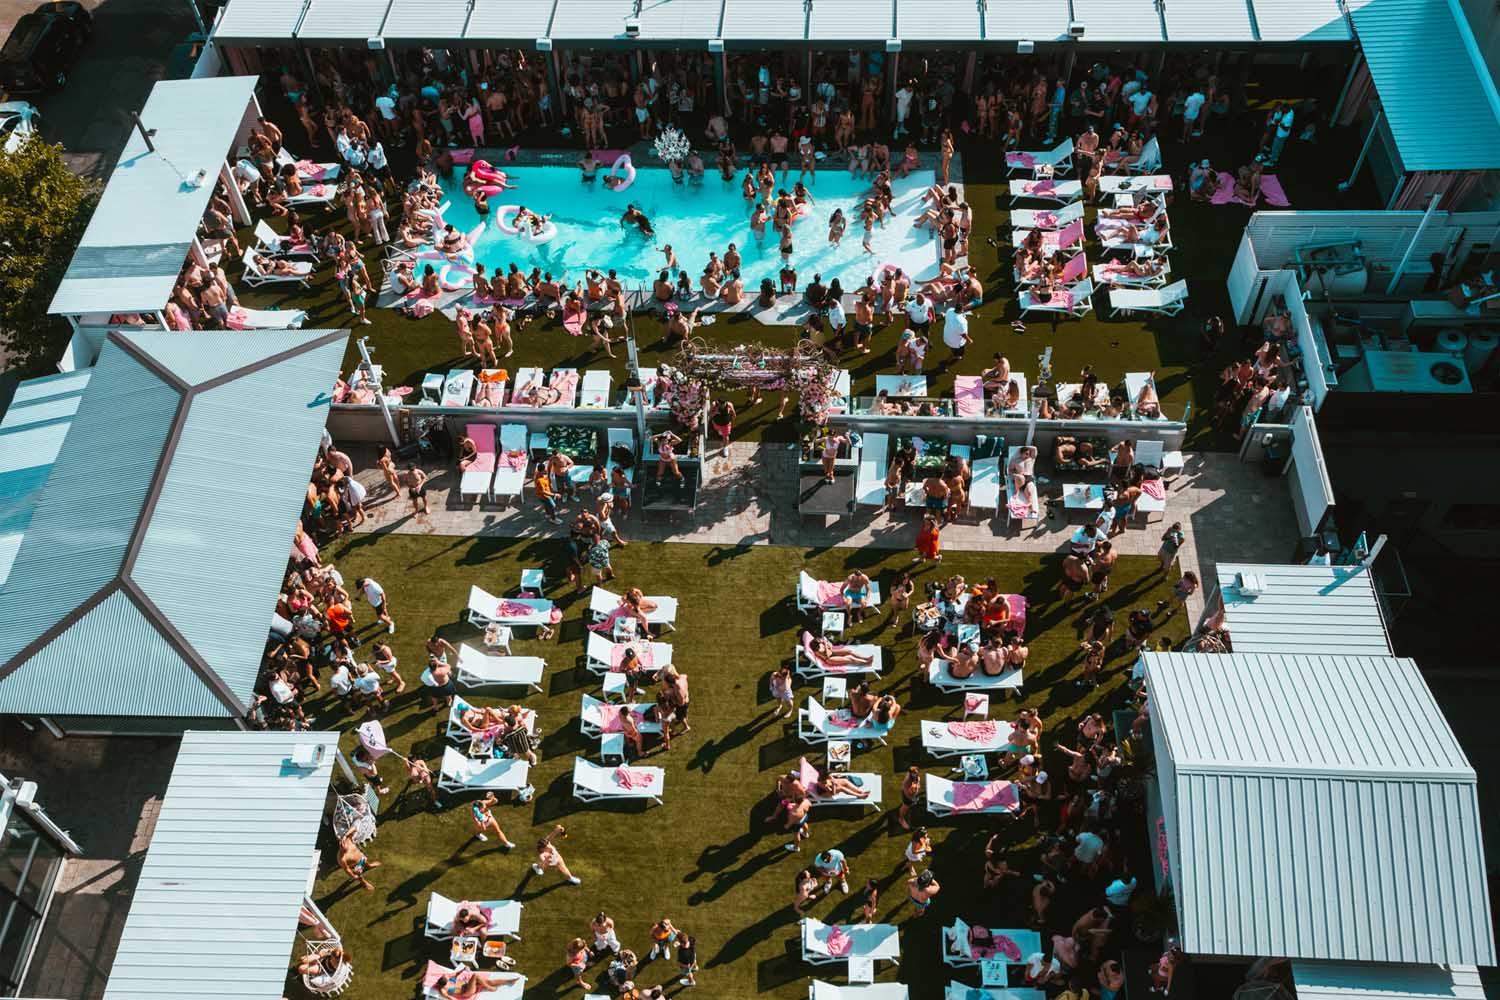 Beat the Heat This Summer at NYC’s Newest Rooftop Day Club